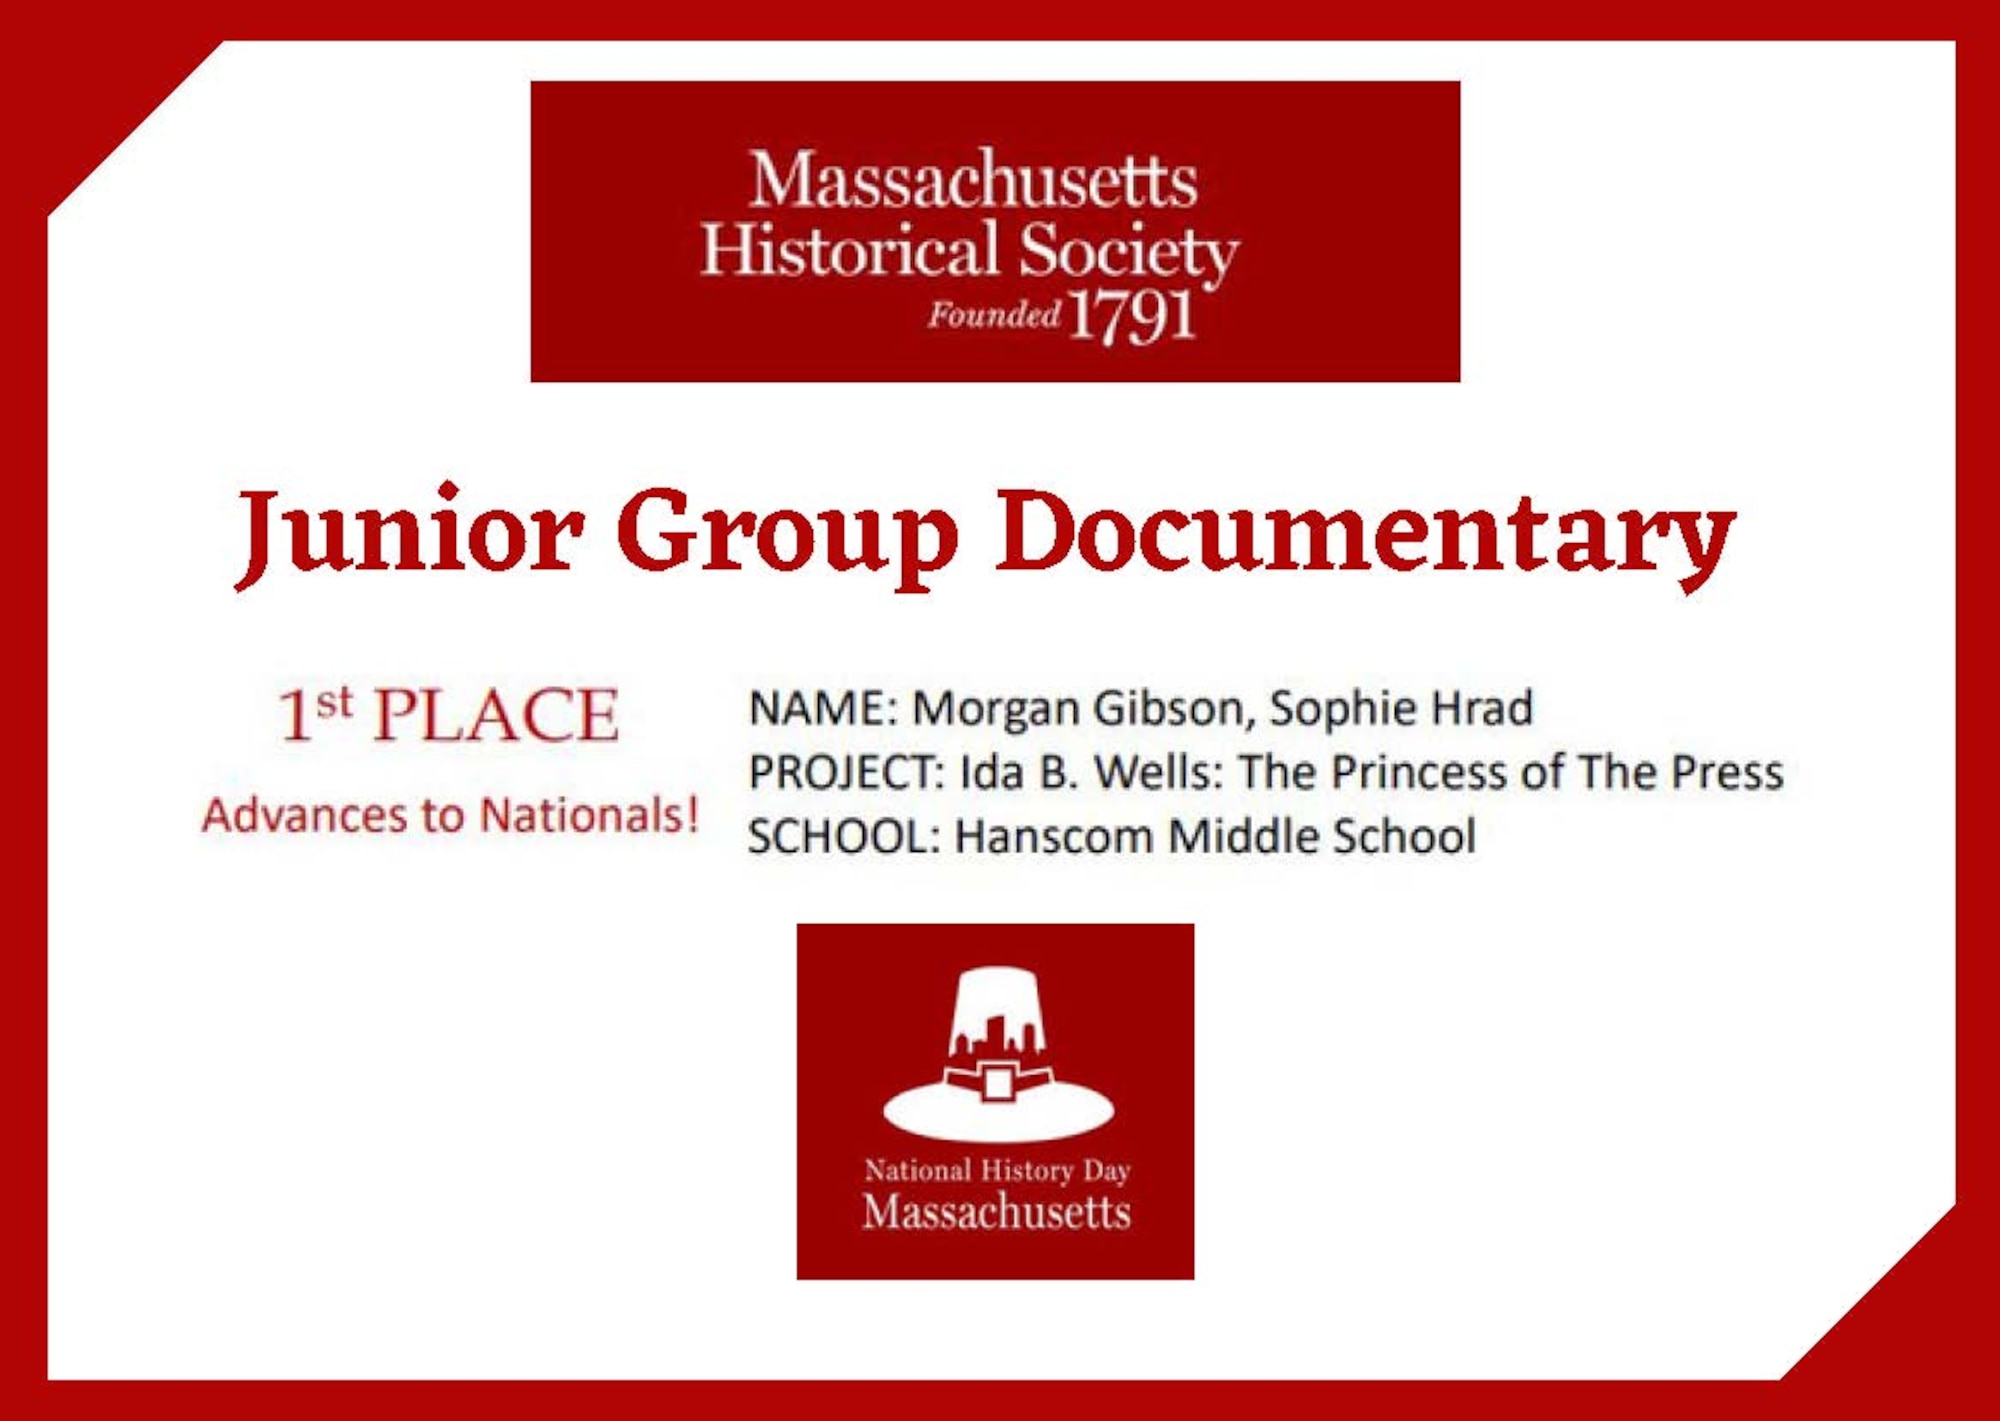 Morgan Gibson and Sophie Hrad, eighth grade students from Hanscom Air Force Base Middle School, Mass., came in first place during the state-level National History Day competition for the junior group documentary category. The Hanscom students beat out more than 380 other submissions and will advance to the national competition in June.